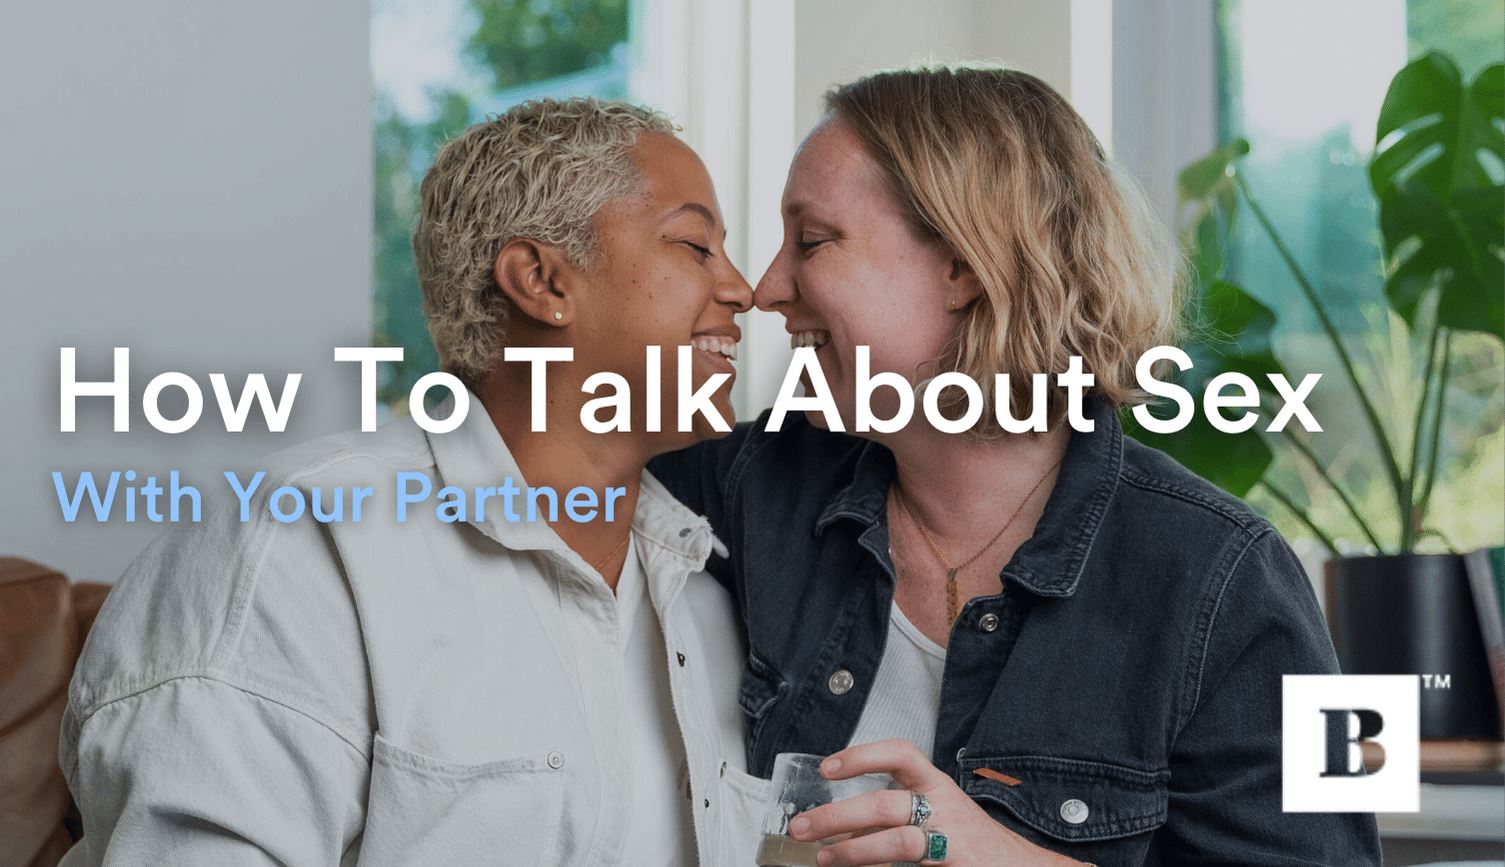 How To Talk About Sex With Your Partner